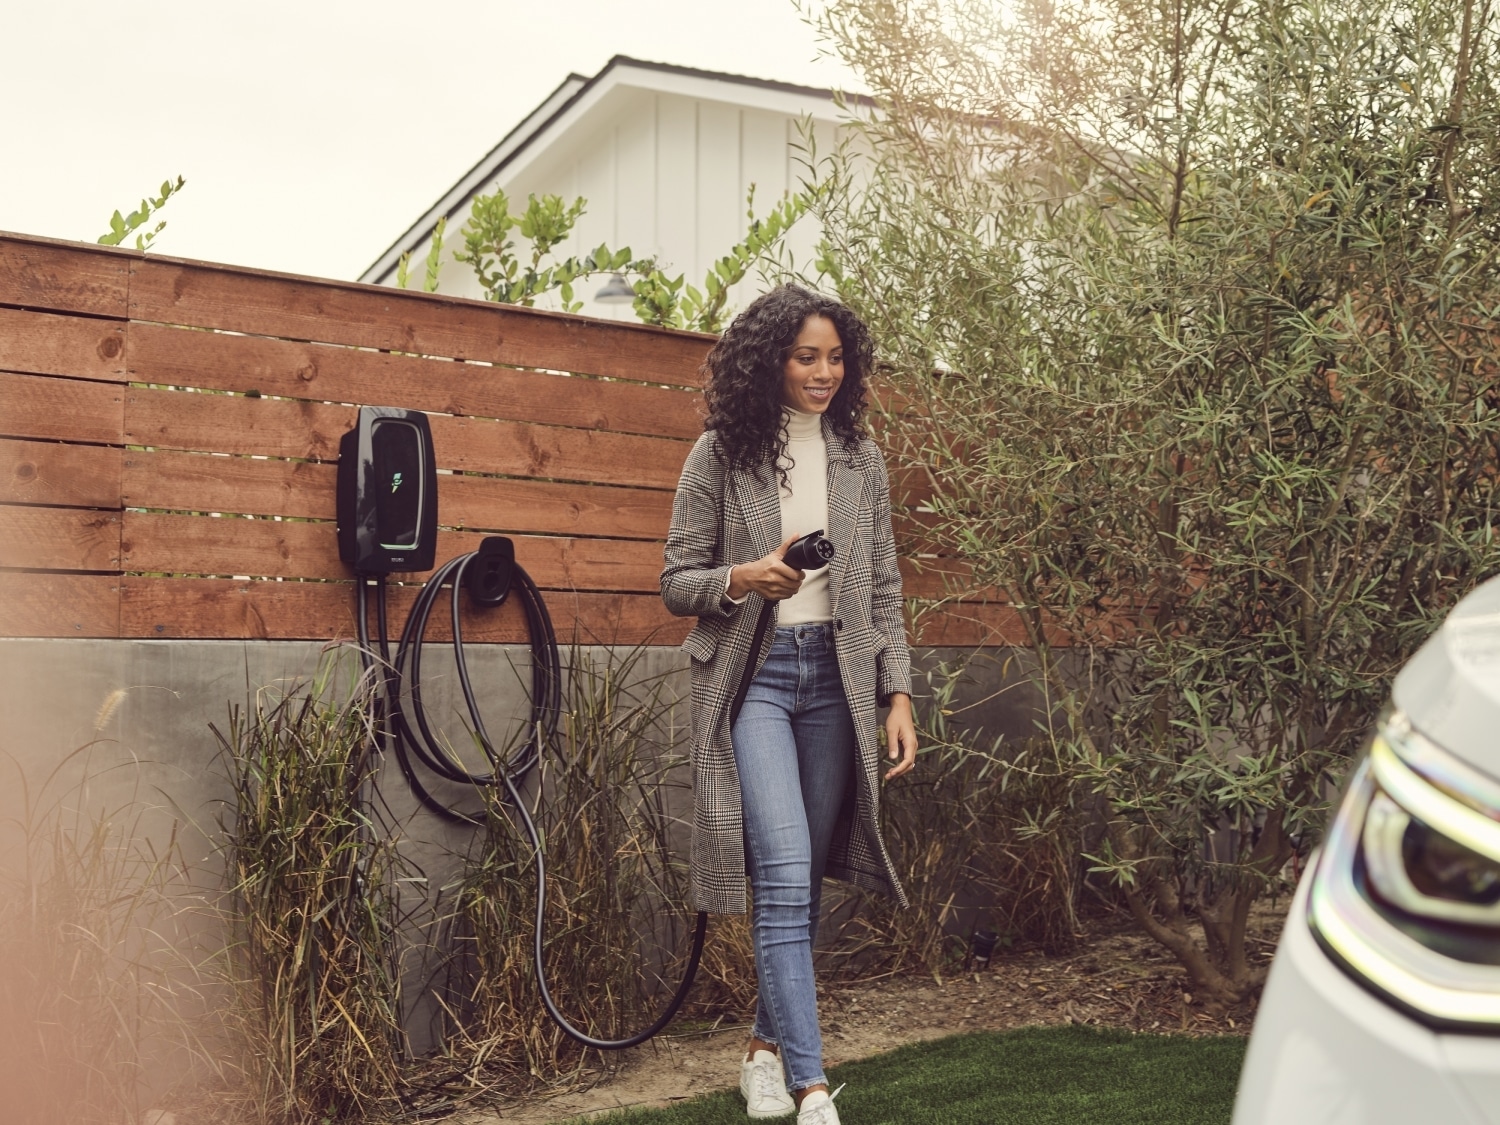 Electrify Canada Introduces Electrify Home, Offering Connected Charging Solutions for Electric Vehicles